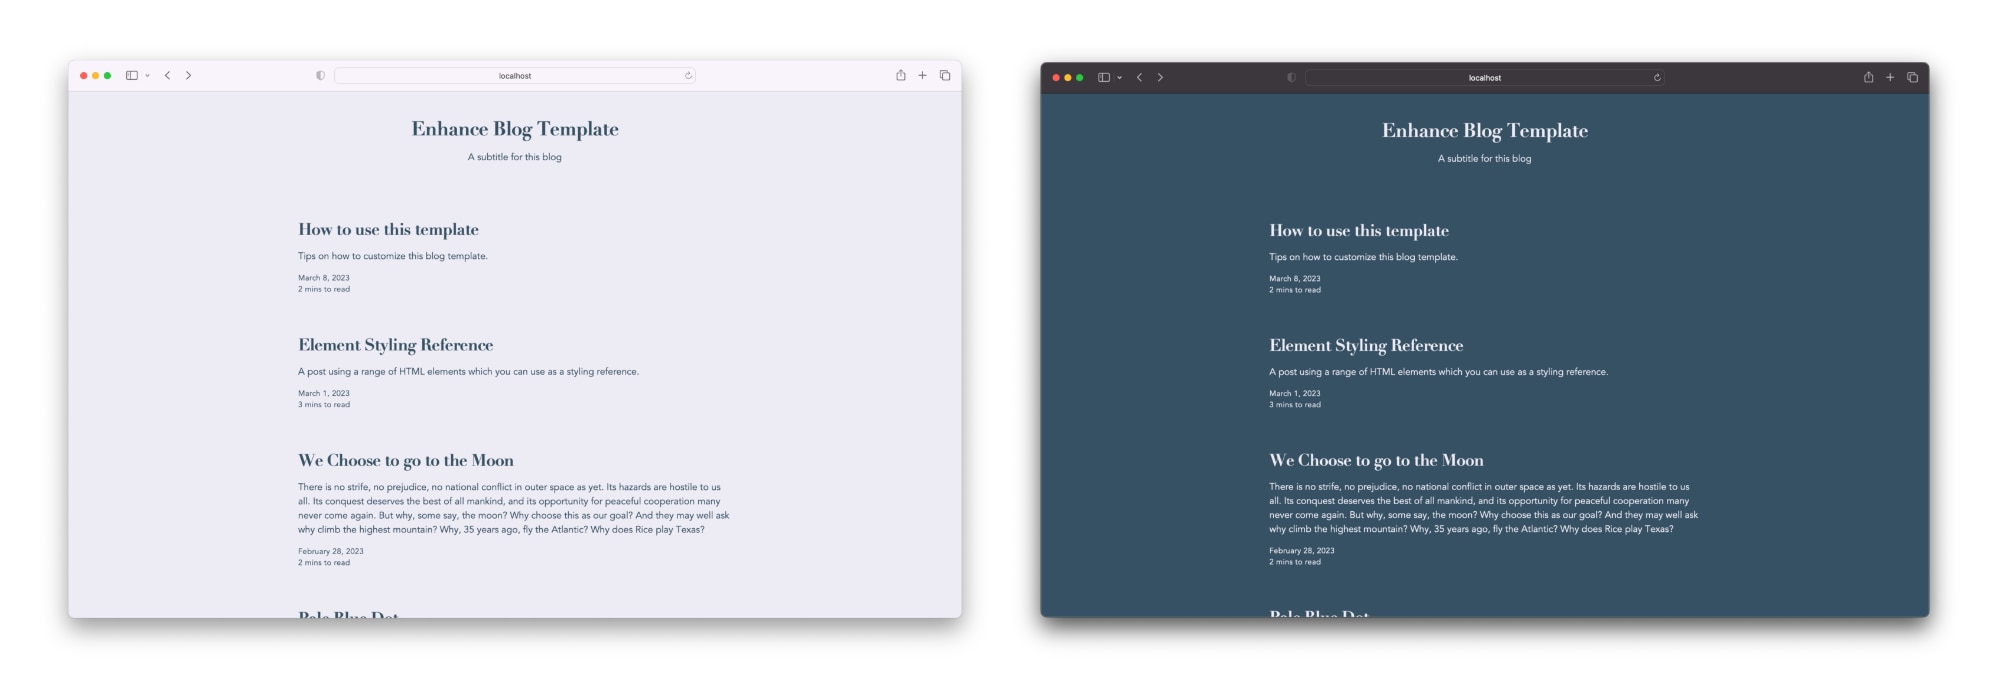 The previous default theme, now called "elegant", featuring a mix of sans serif and serify typography in light and dark variants